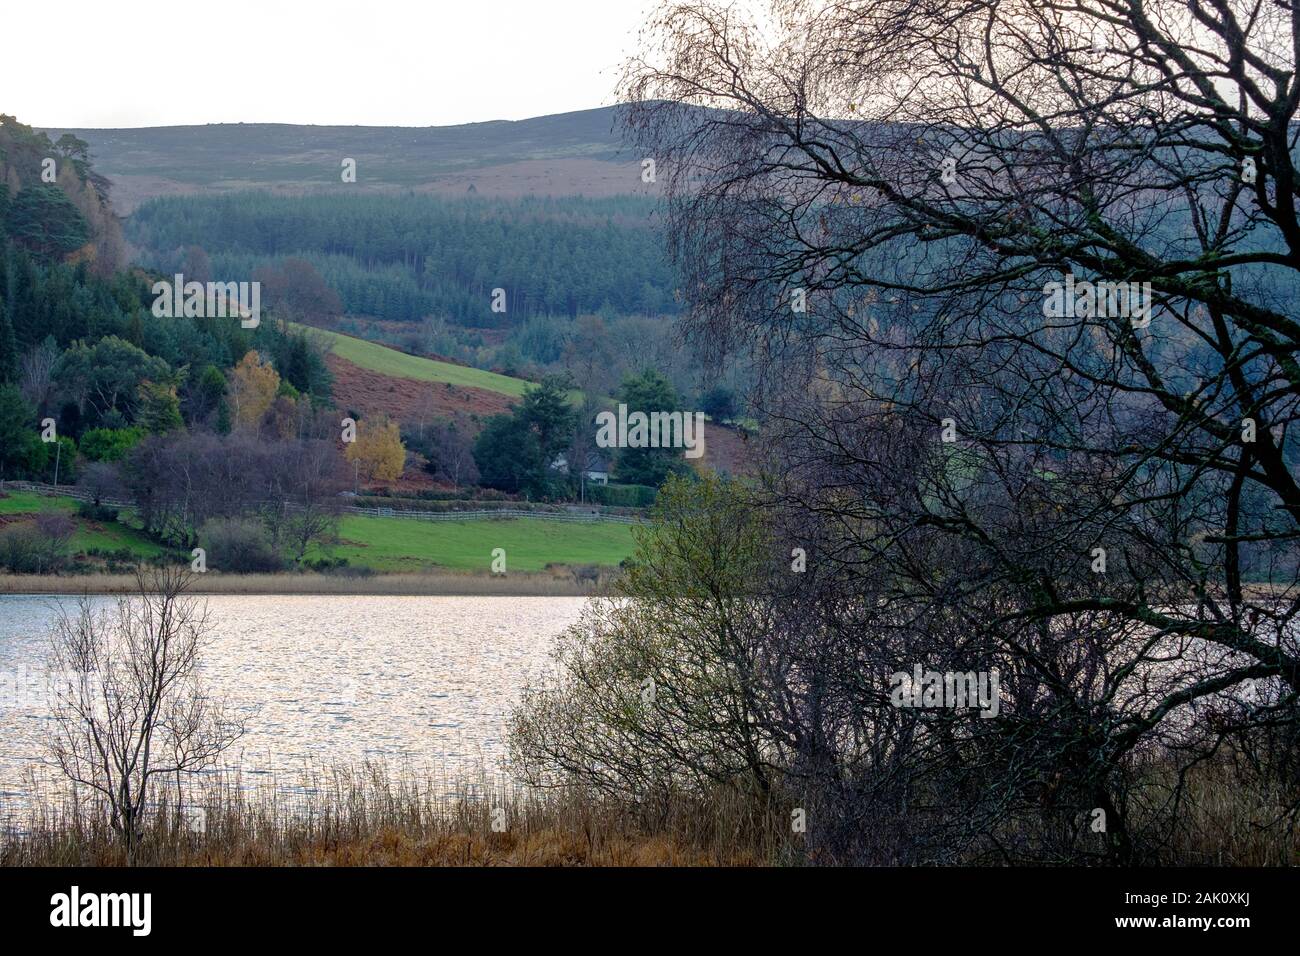 The upper lake in Wicklow Mountains National Park offers great views, together with the autumn colors and the hilly background. Stock Photo